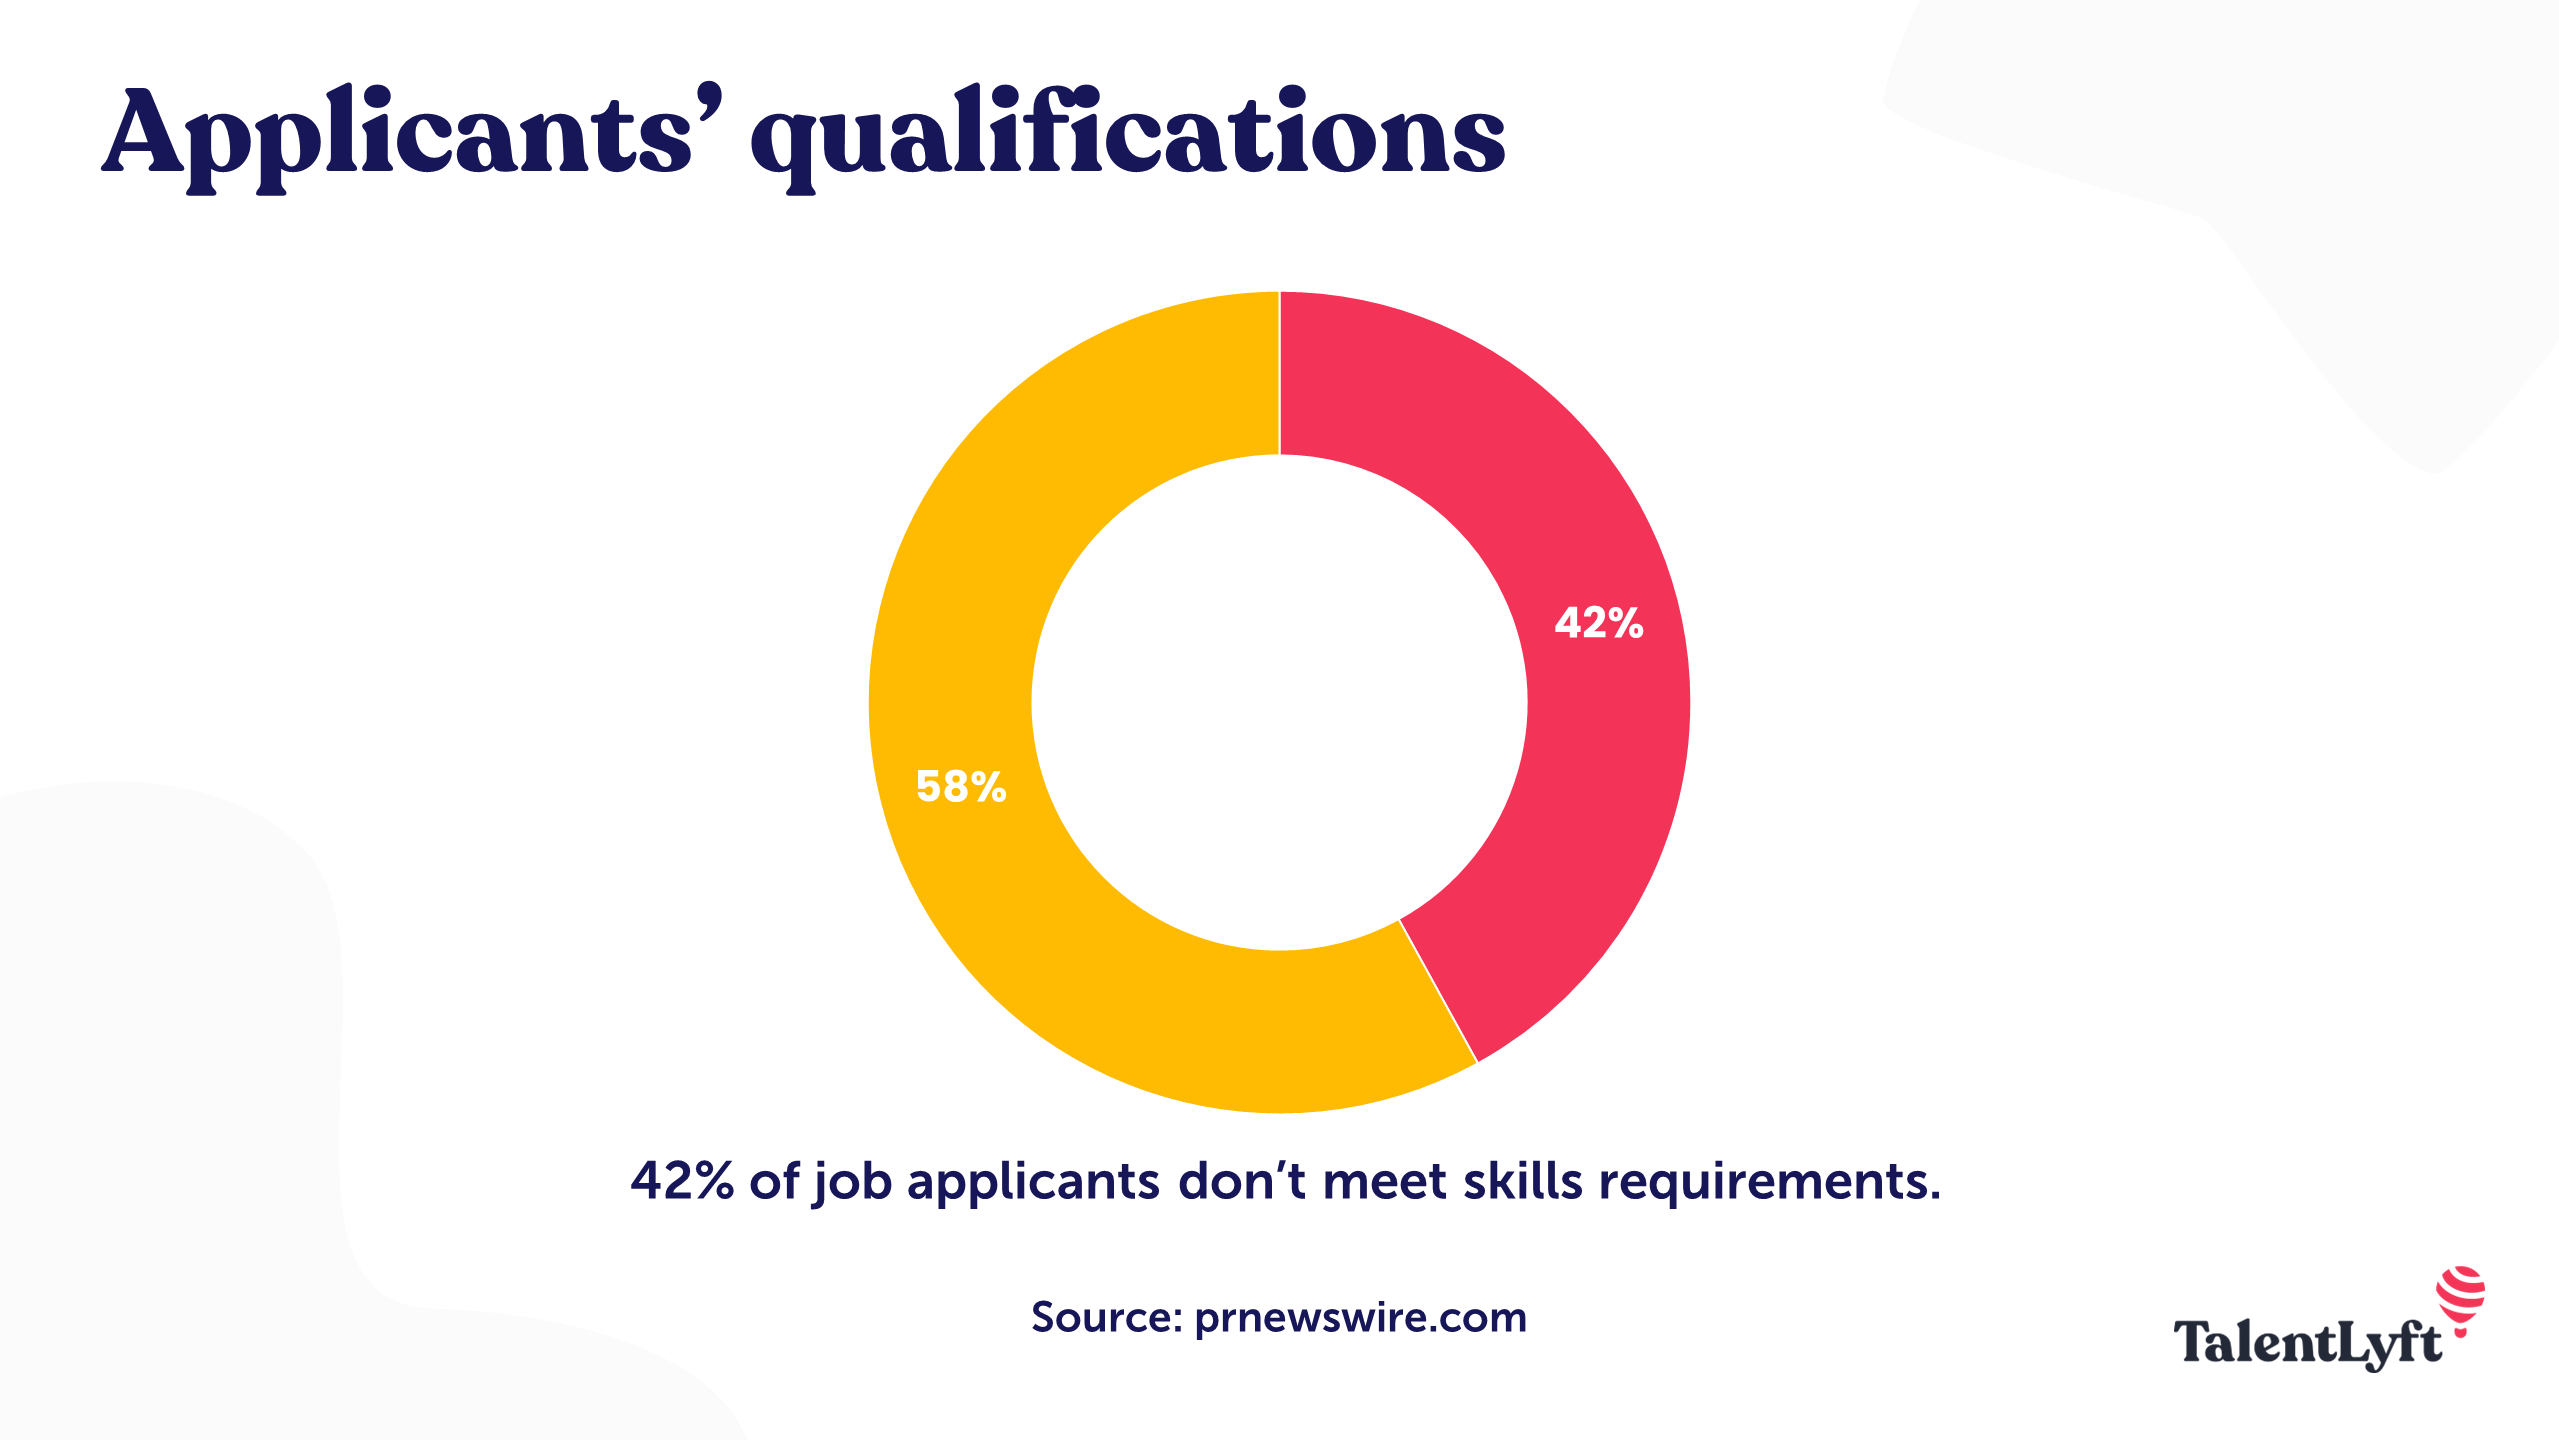 How many applicants meet the requirements?